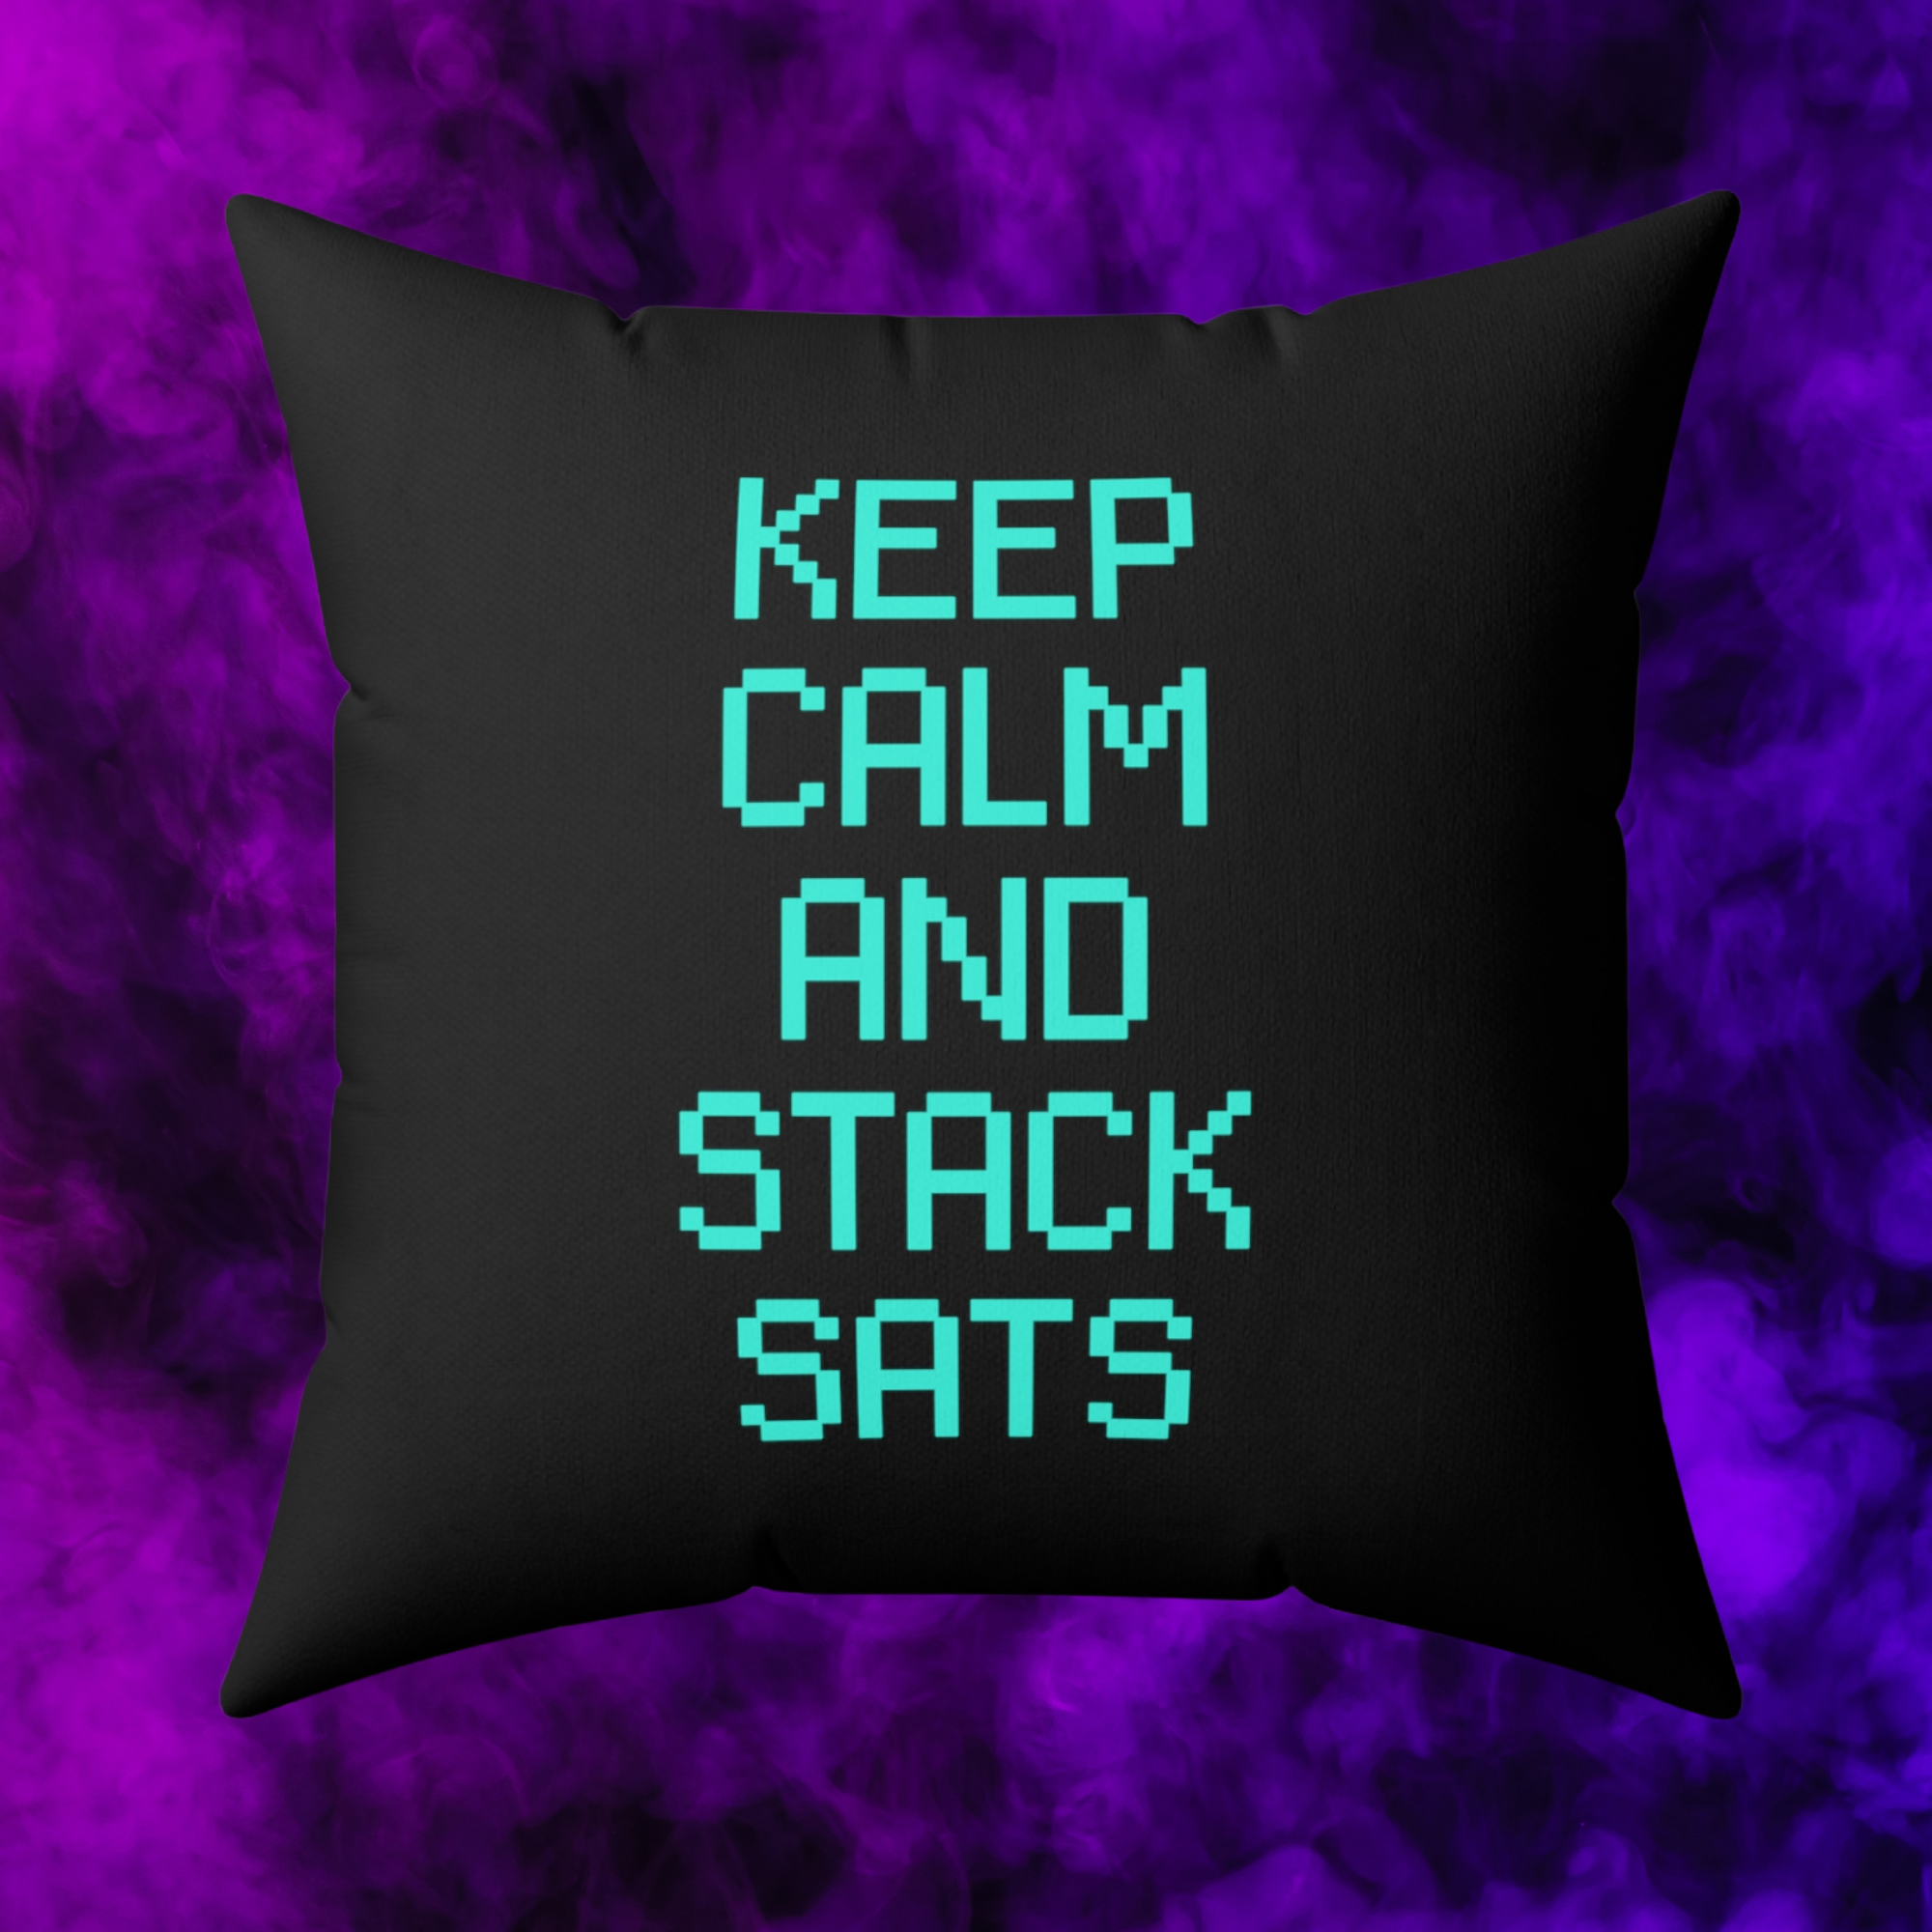 Bitcoin Home Decor - Keep Calm And Stack Sats Pillow (Pixel Style) available from NEONCRYPTO STORE.